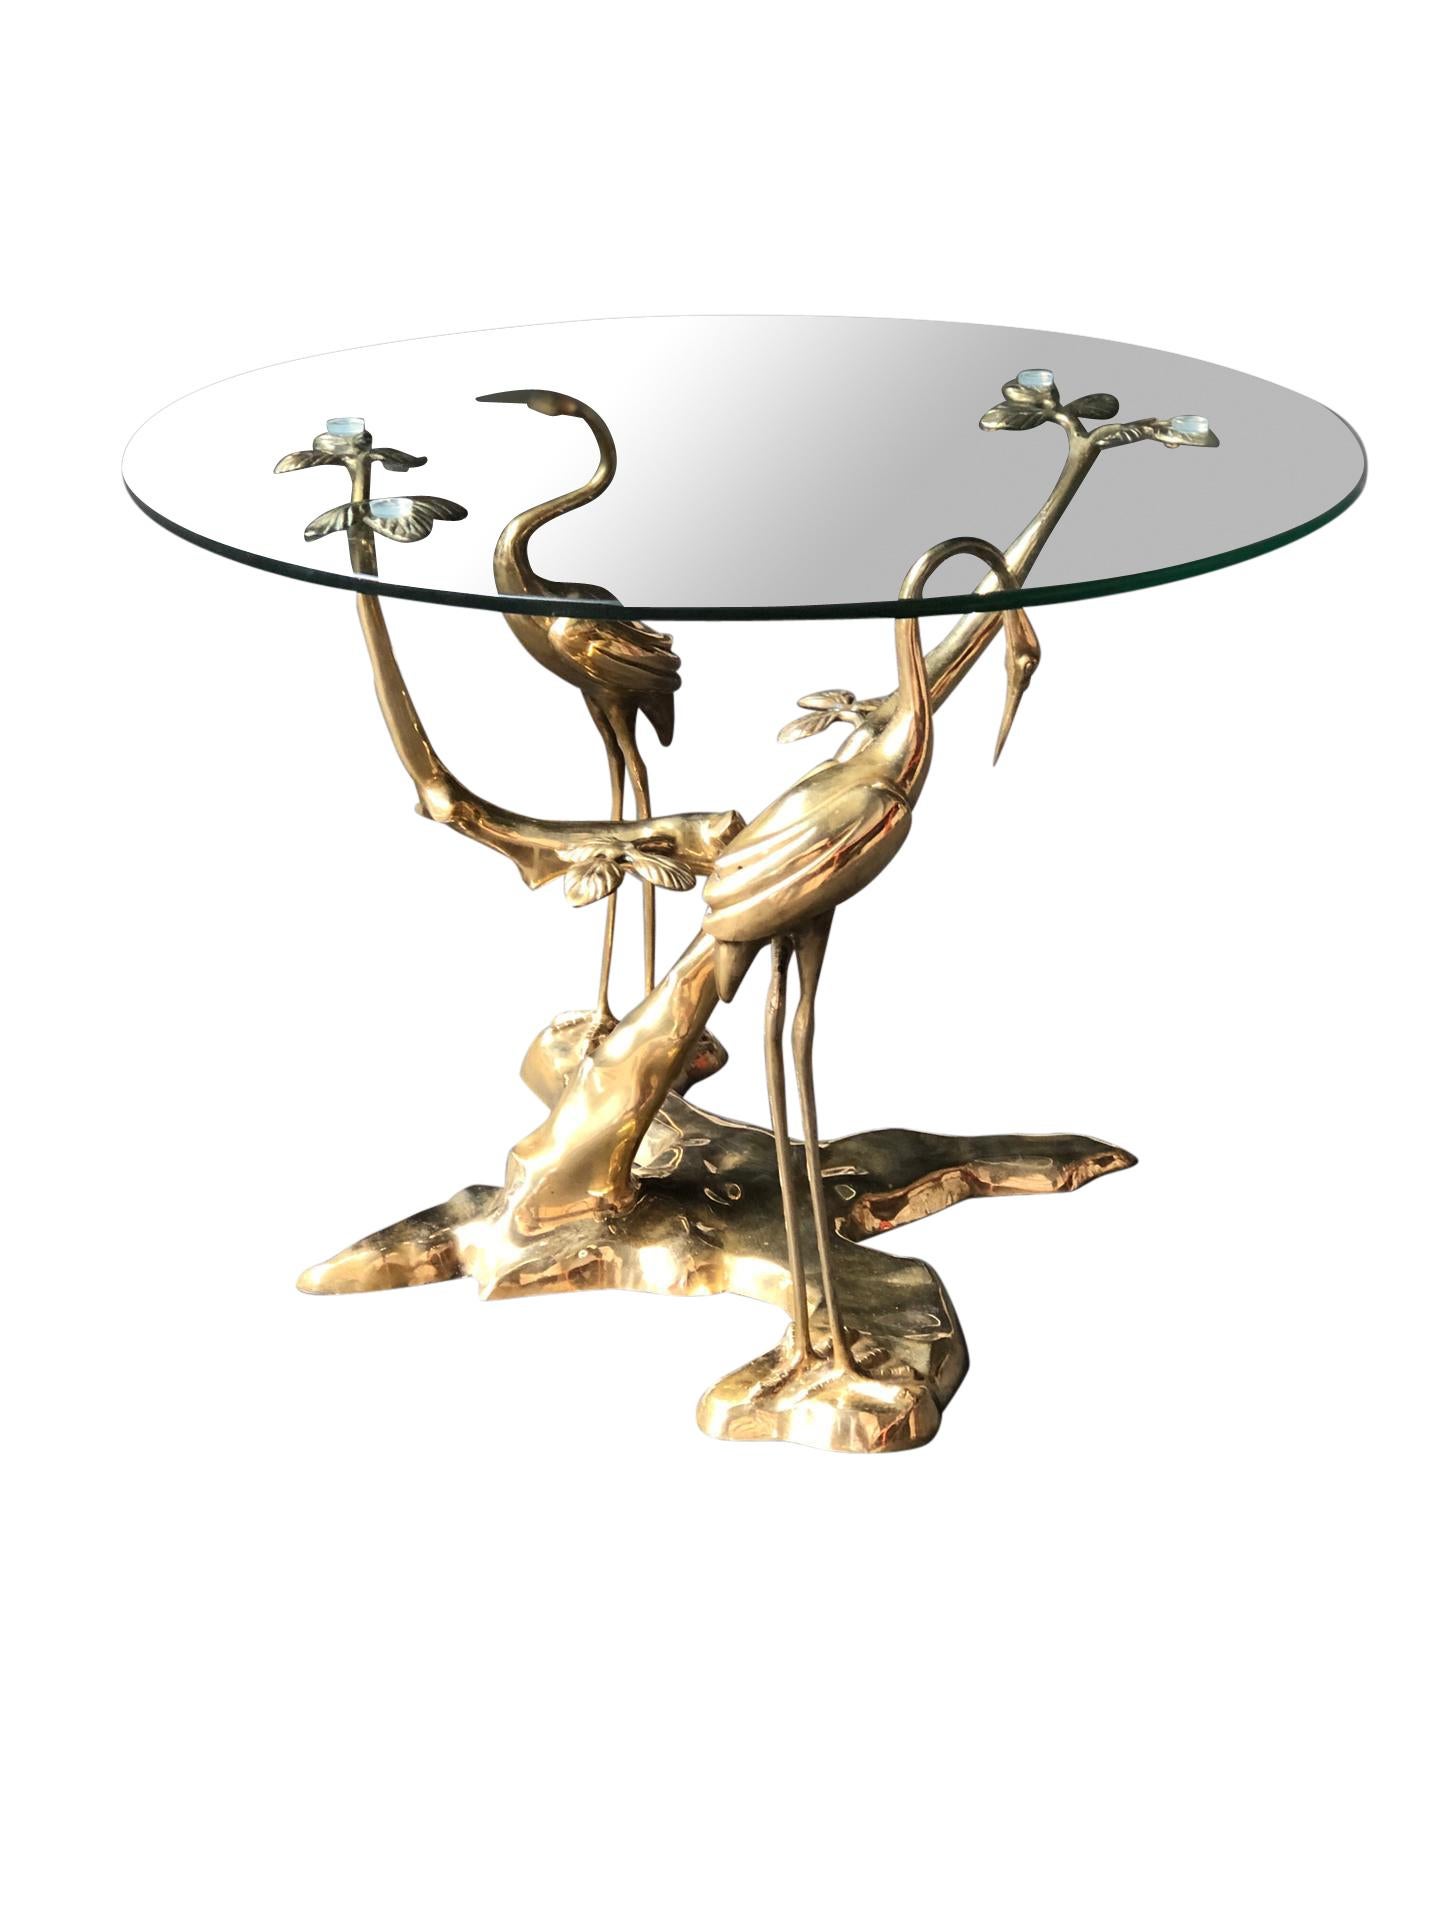 Bronze coffee table by Willy Daro depicting a bonzai tree and two crane birds.

Beautifully manufactured sculpture, comes with a round glass top.

Slight patina, no damages, 

1970s, Belgium

Dimensions:
Height 78cm/30.70